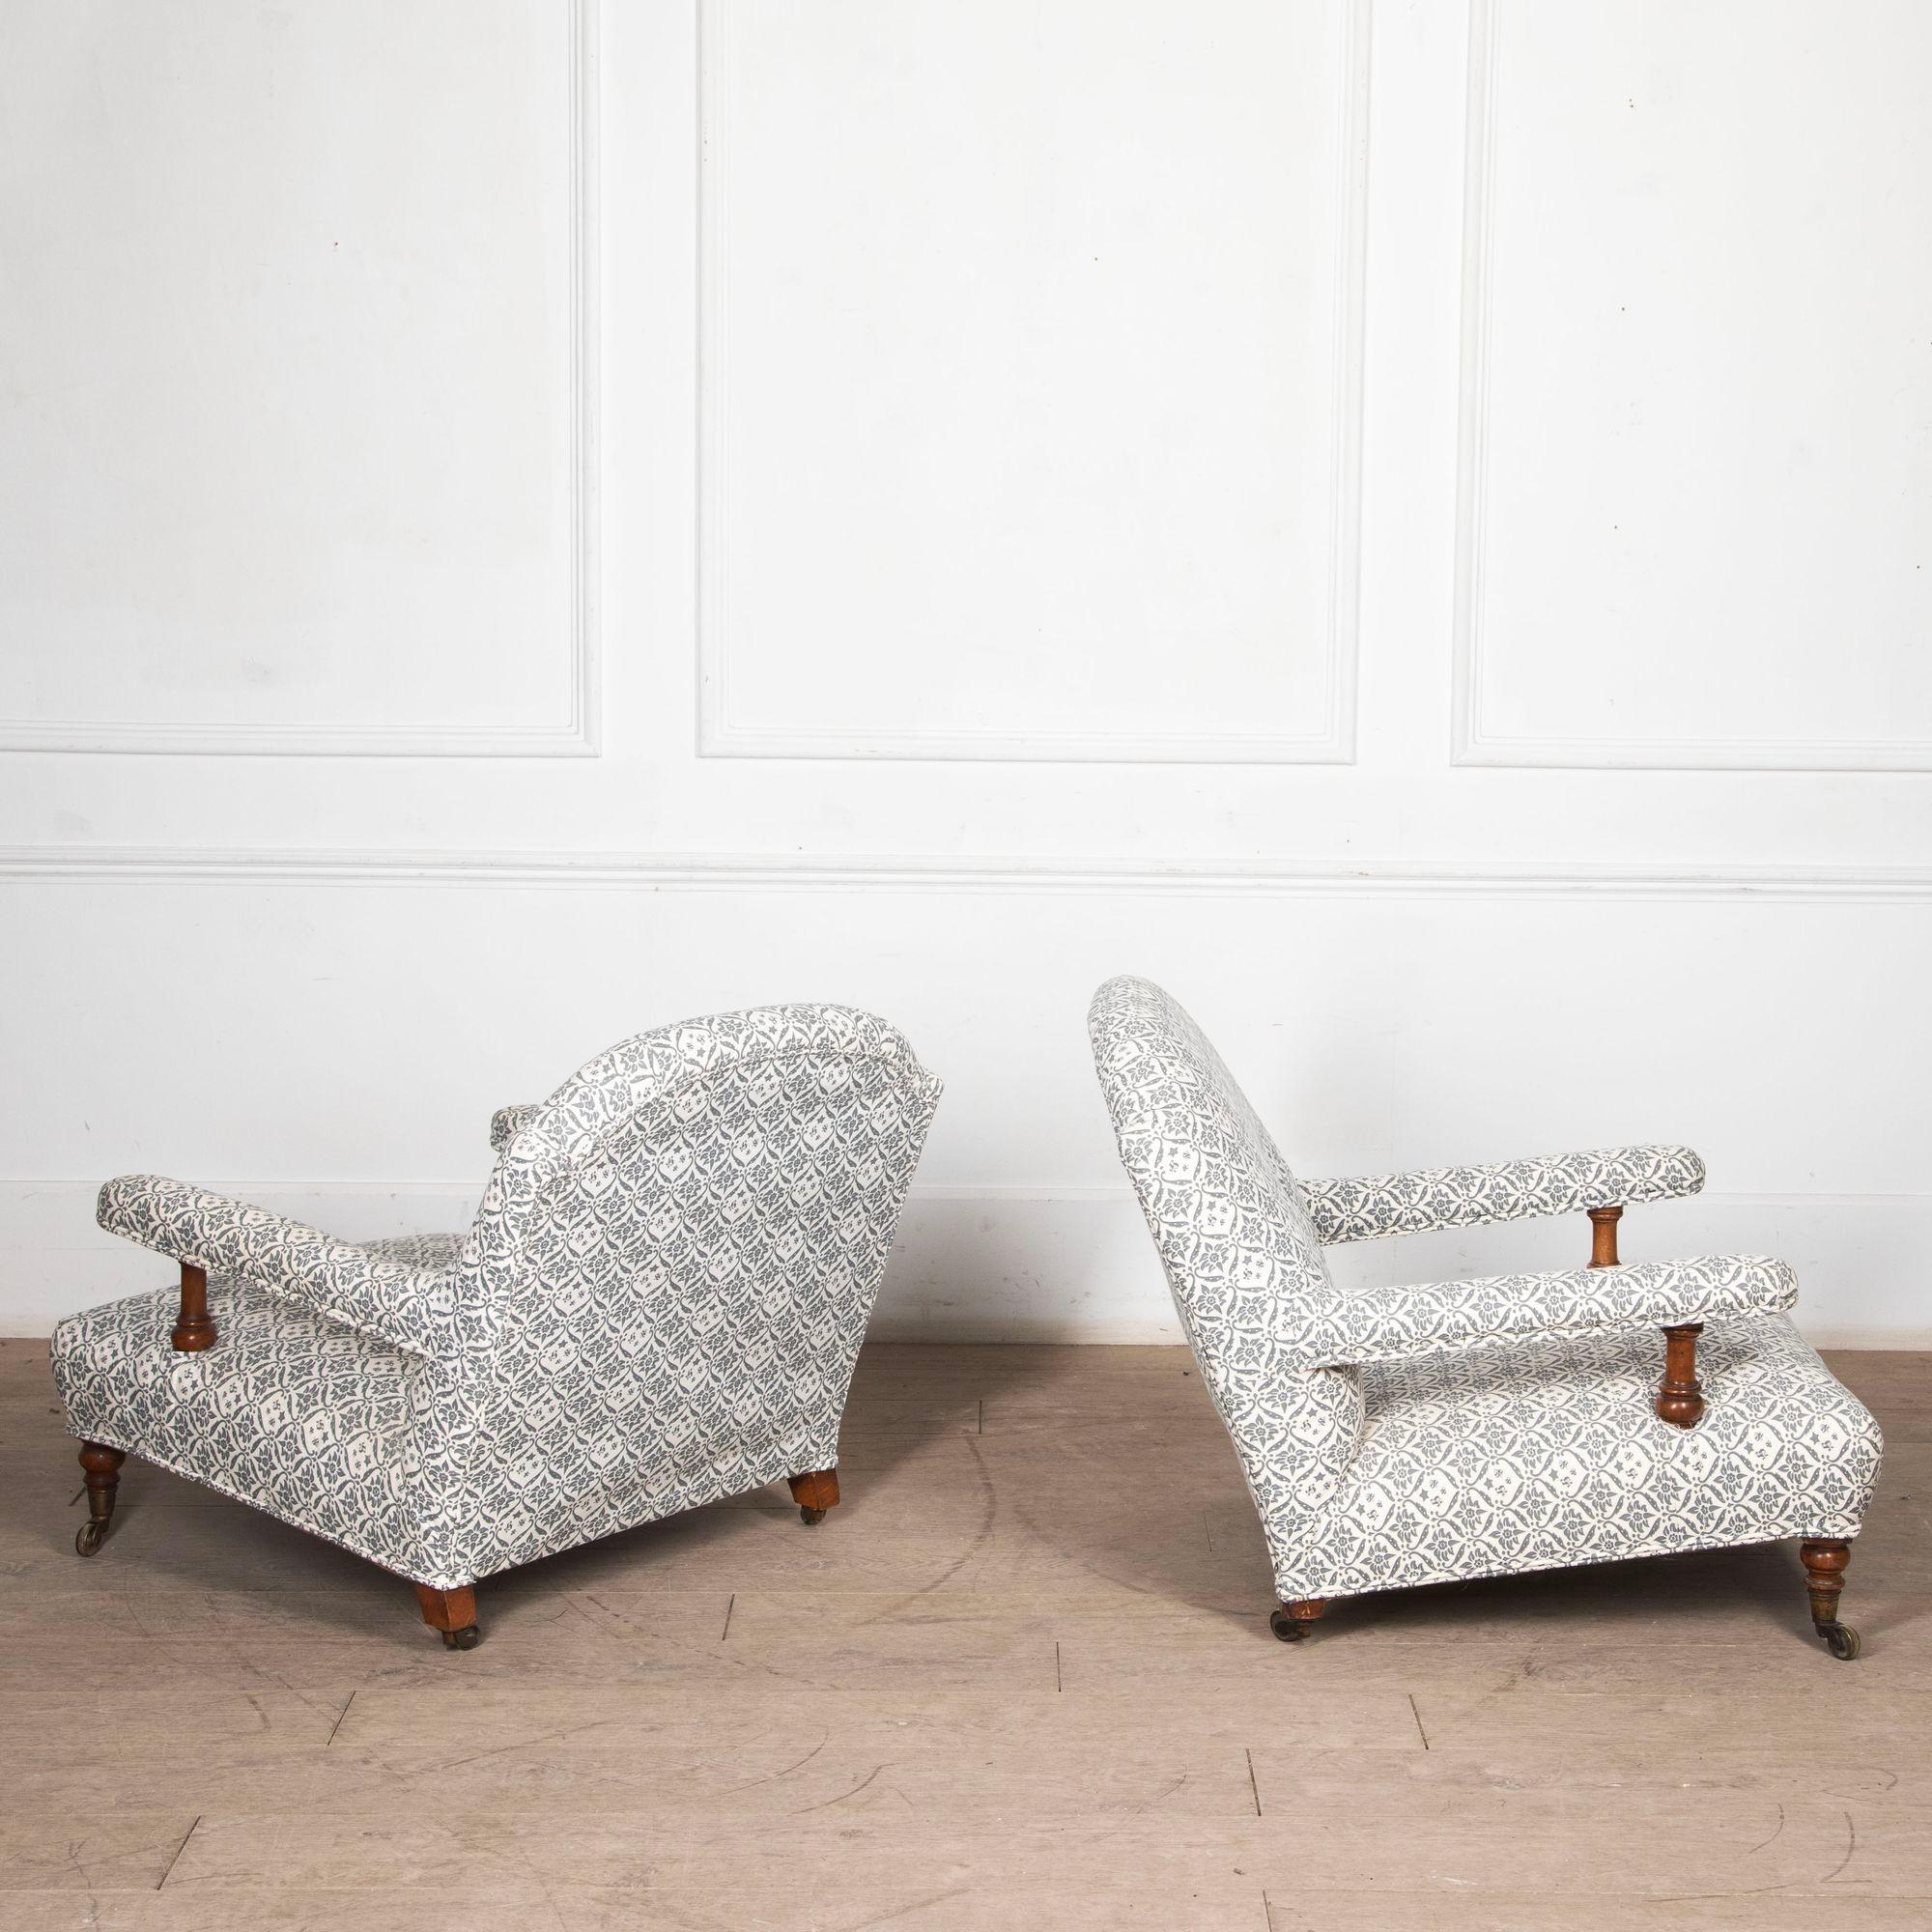 Pair of English Howard and sons 'open arm' low armchairs.
Circa 1870 with fine turned front legs upholstered in Howard and sons blue ticking.